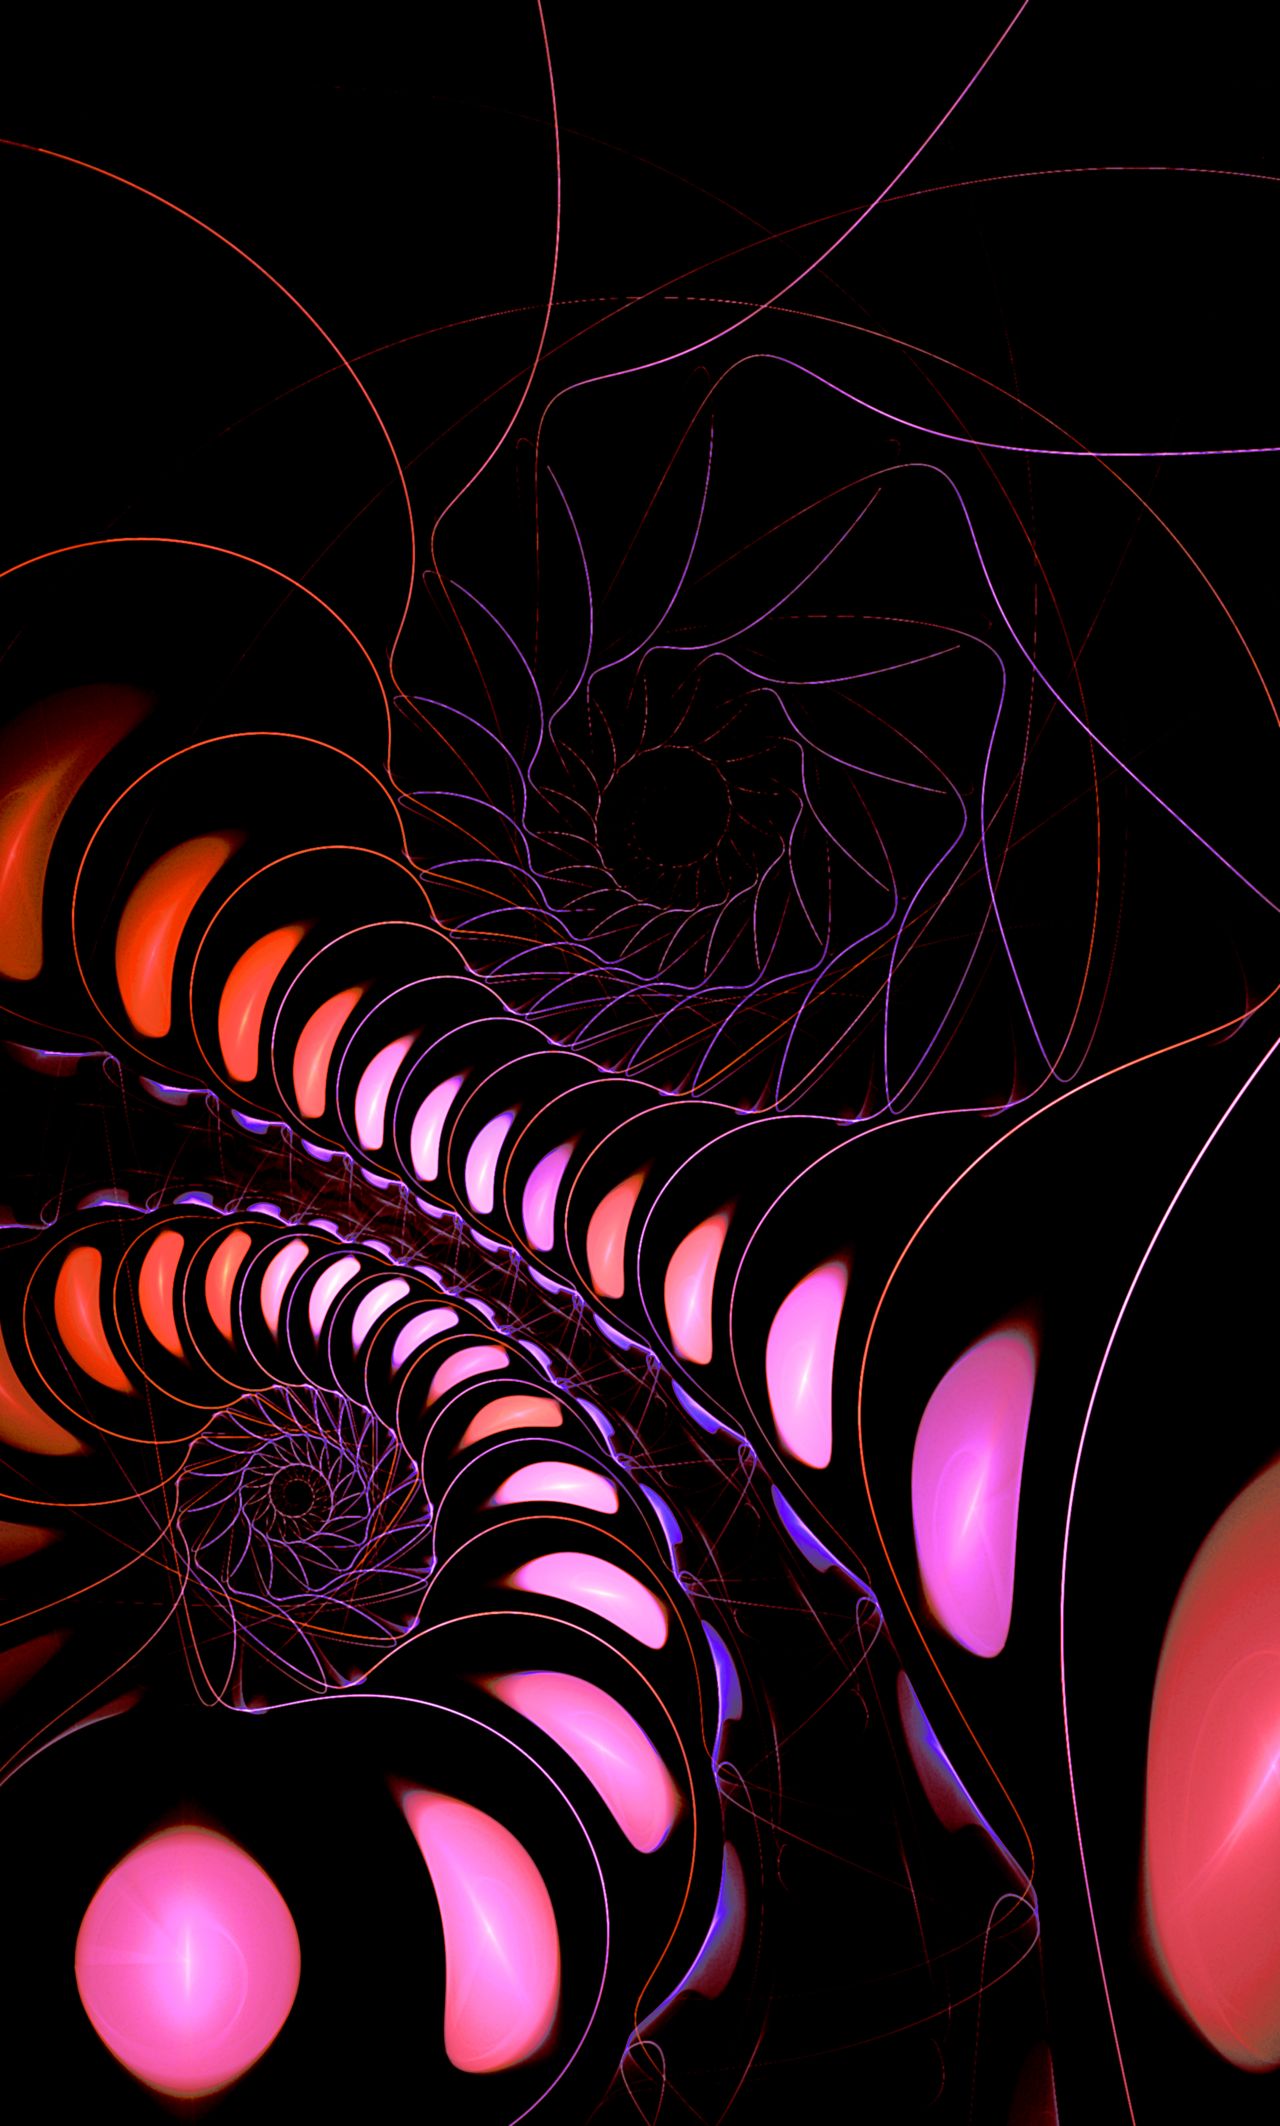 3d, swirling, fractal, spiral, confused, intricate, involute Full HD